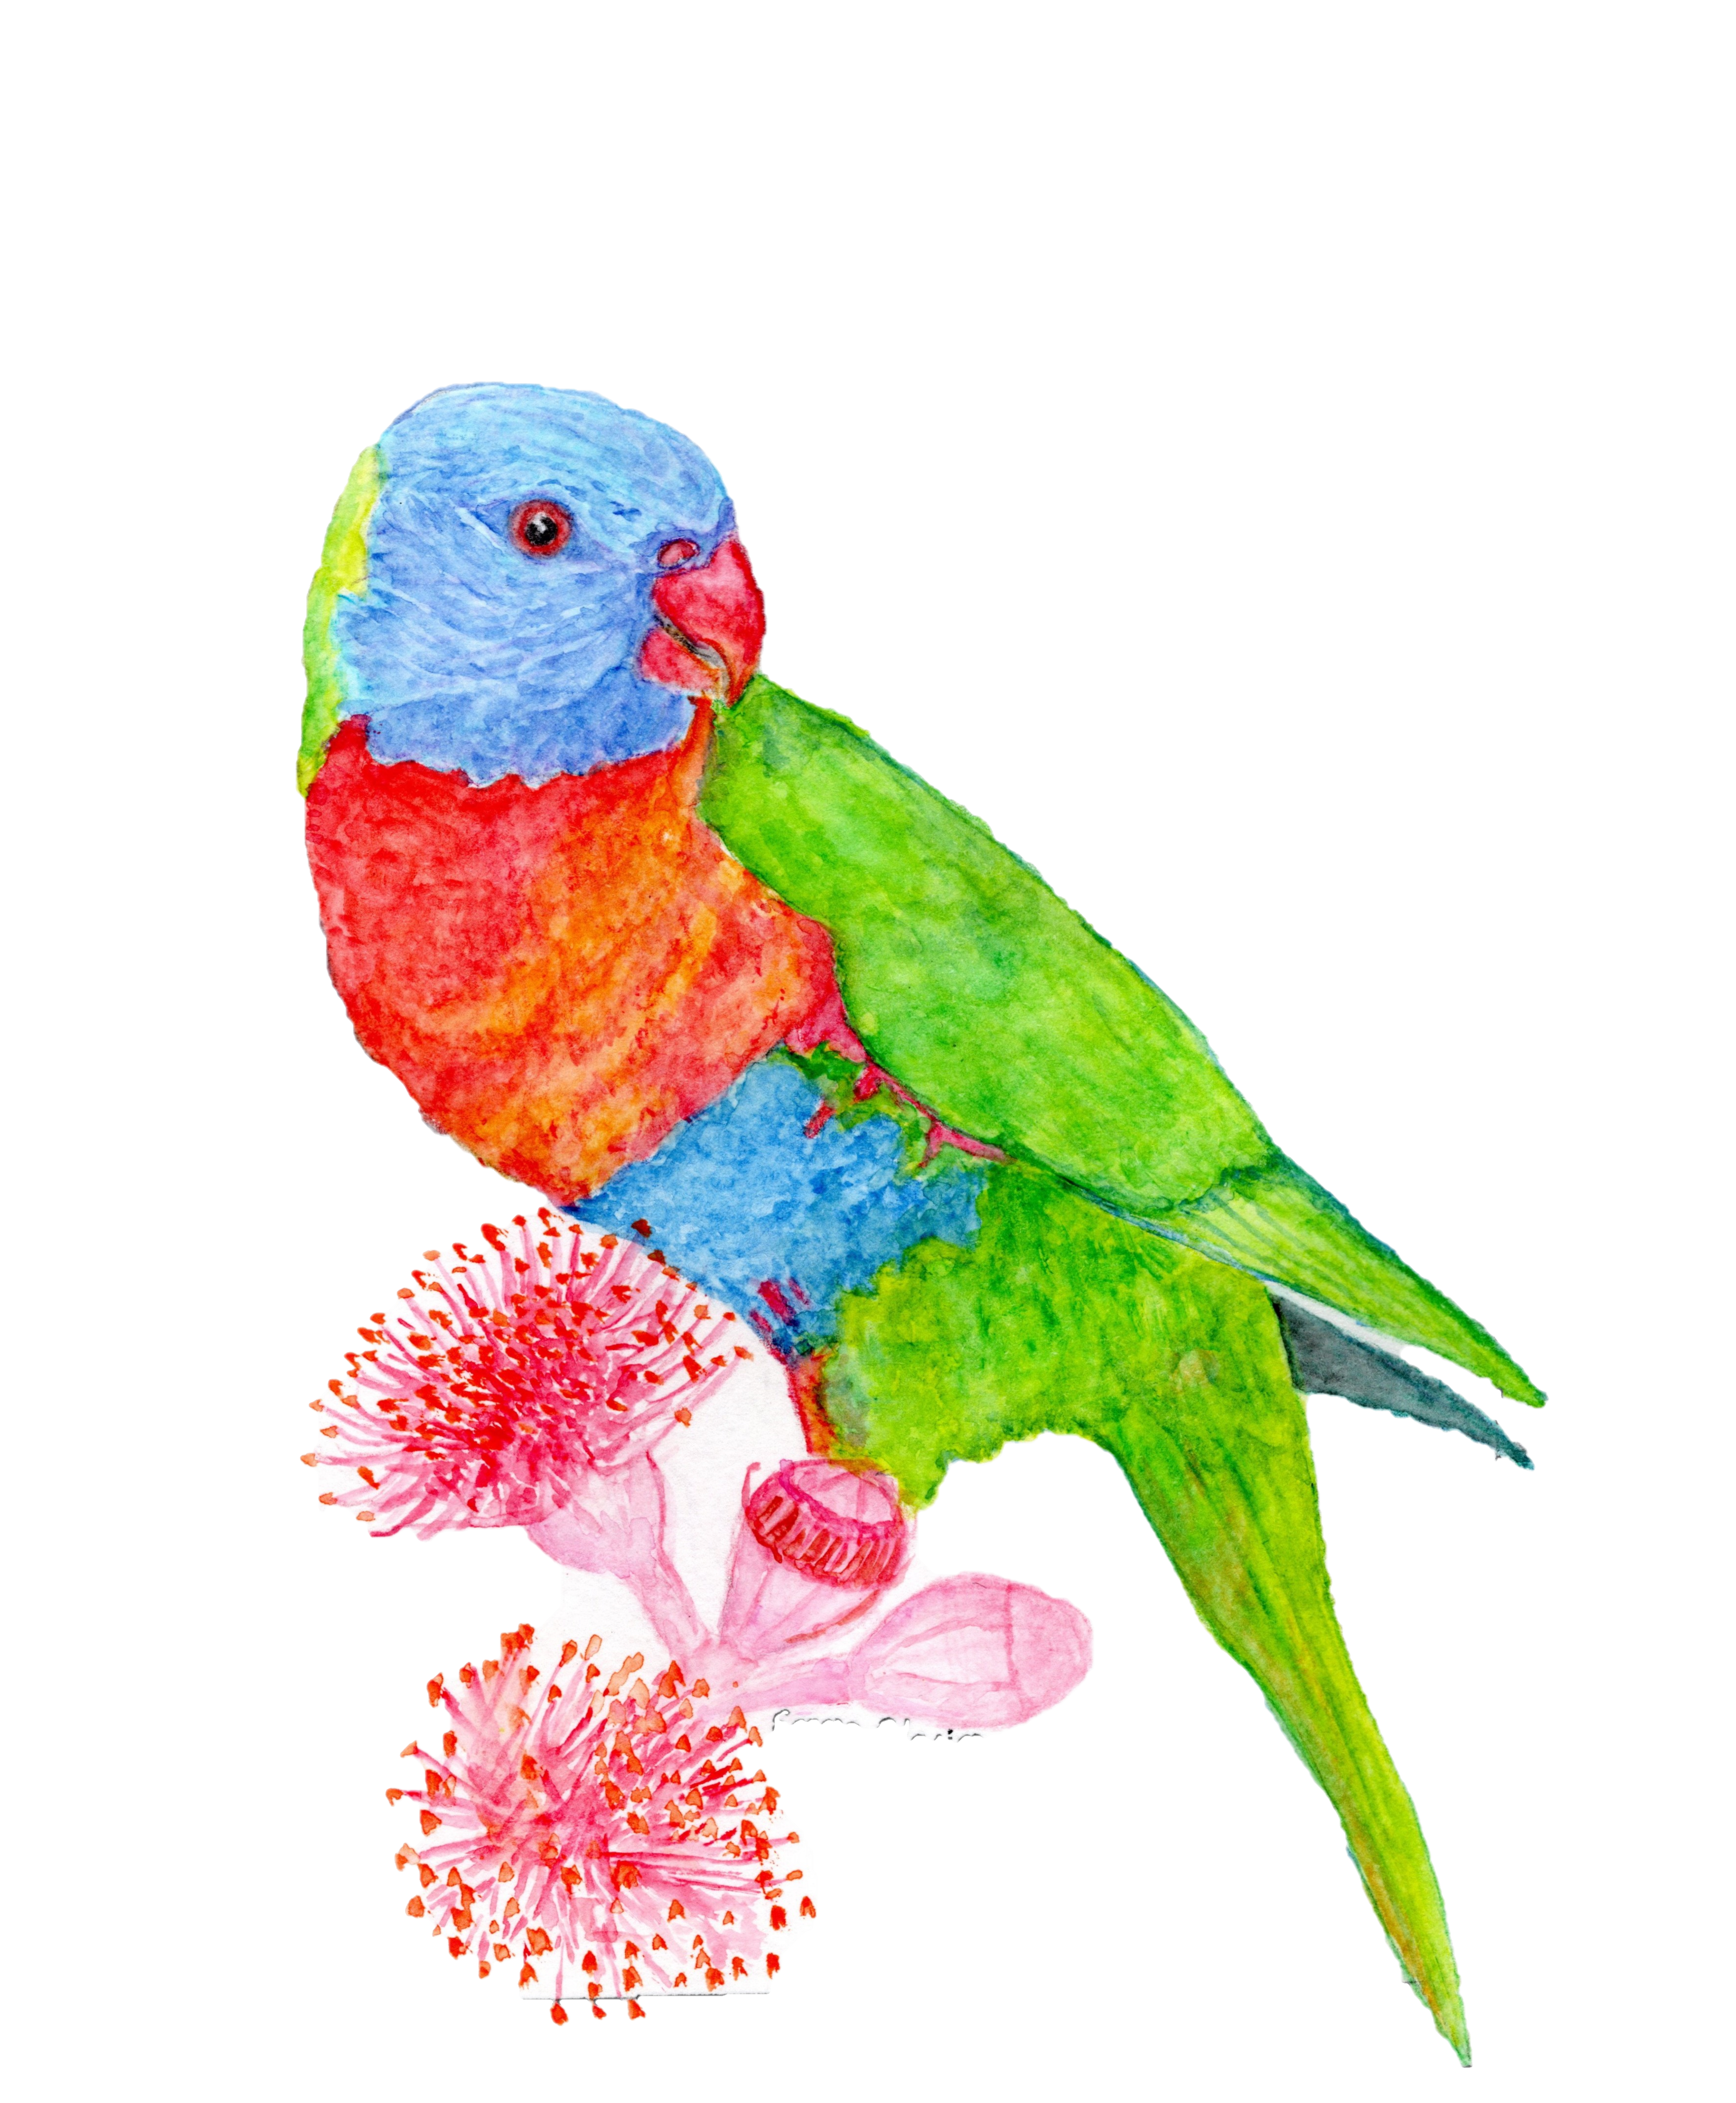 Images shows a watercolour painting of a Rainbow Lorikeet by artist Emma Pilgrim in her Artist Profile story with Art Trails Tasmania